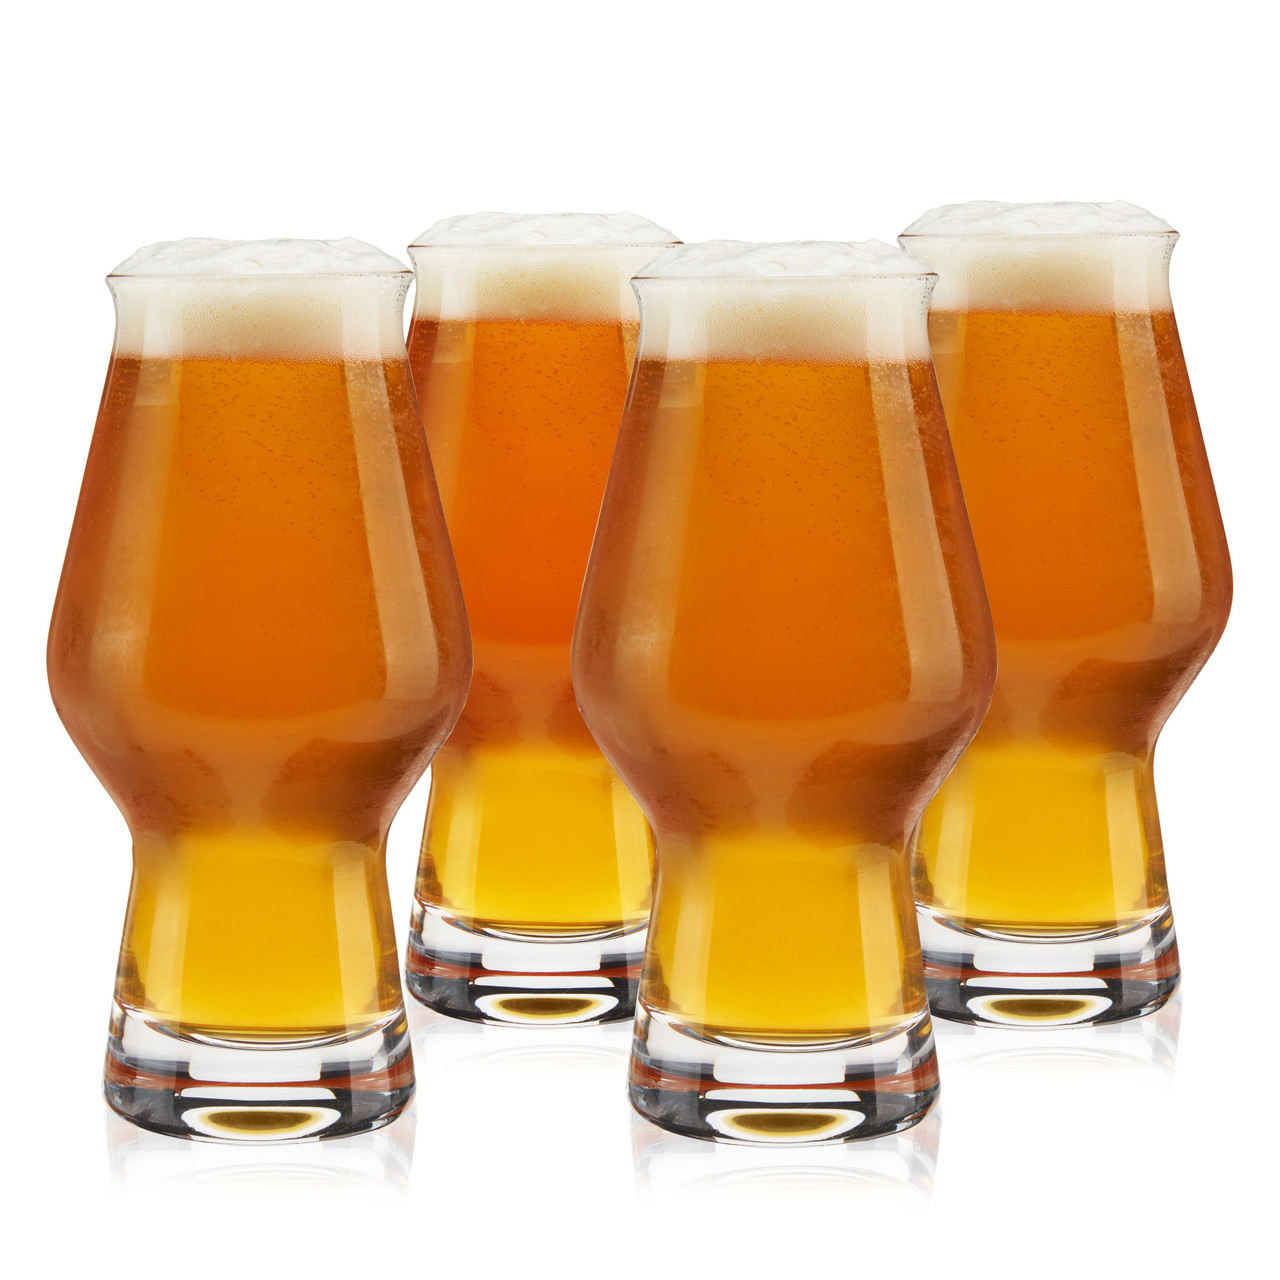 https://cdn11.bigcommerce.com/s-oo0gdojvjo/images/stencil/1280x1280/products/68497/100640/ipa-beer-glasses-by-true-set-of-4__60607.1683777494.jpg?c=2&imbypass=on